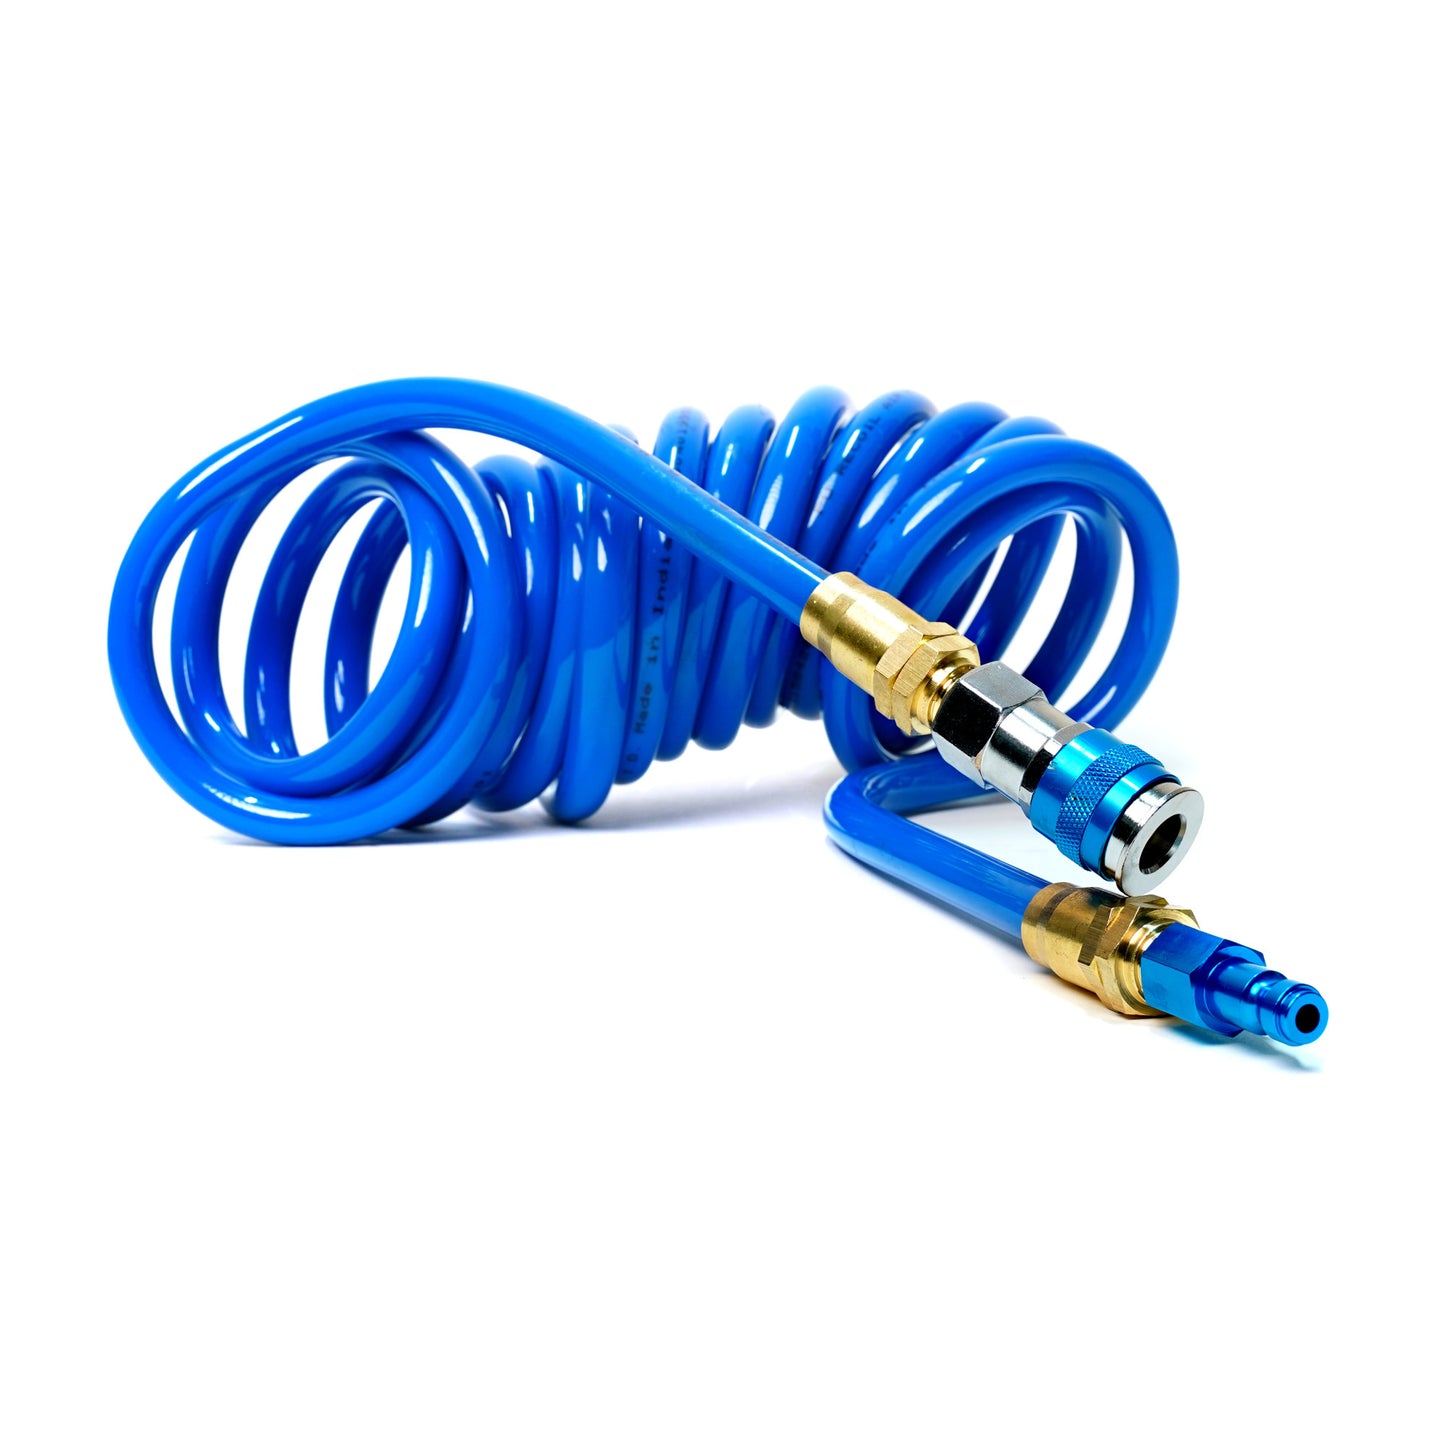 15-Foot Coiled 3/8-Inch ID Air Hose with Adapter and Reusable 1/4-Inch NPT Brass Fittings